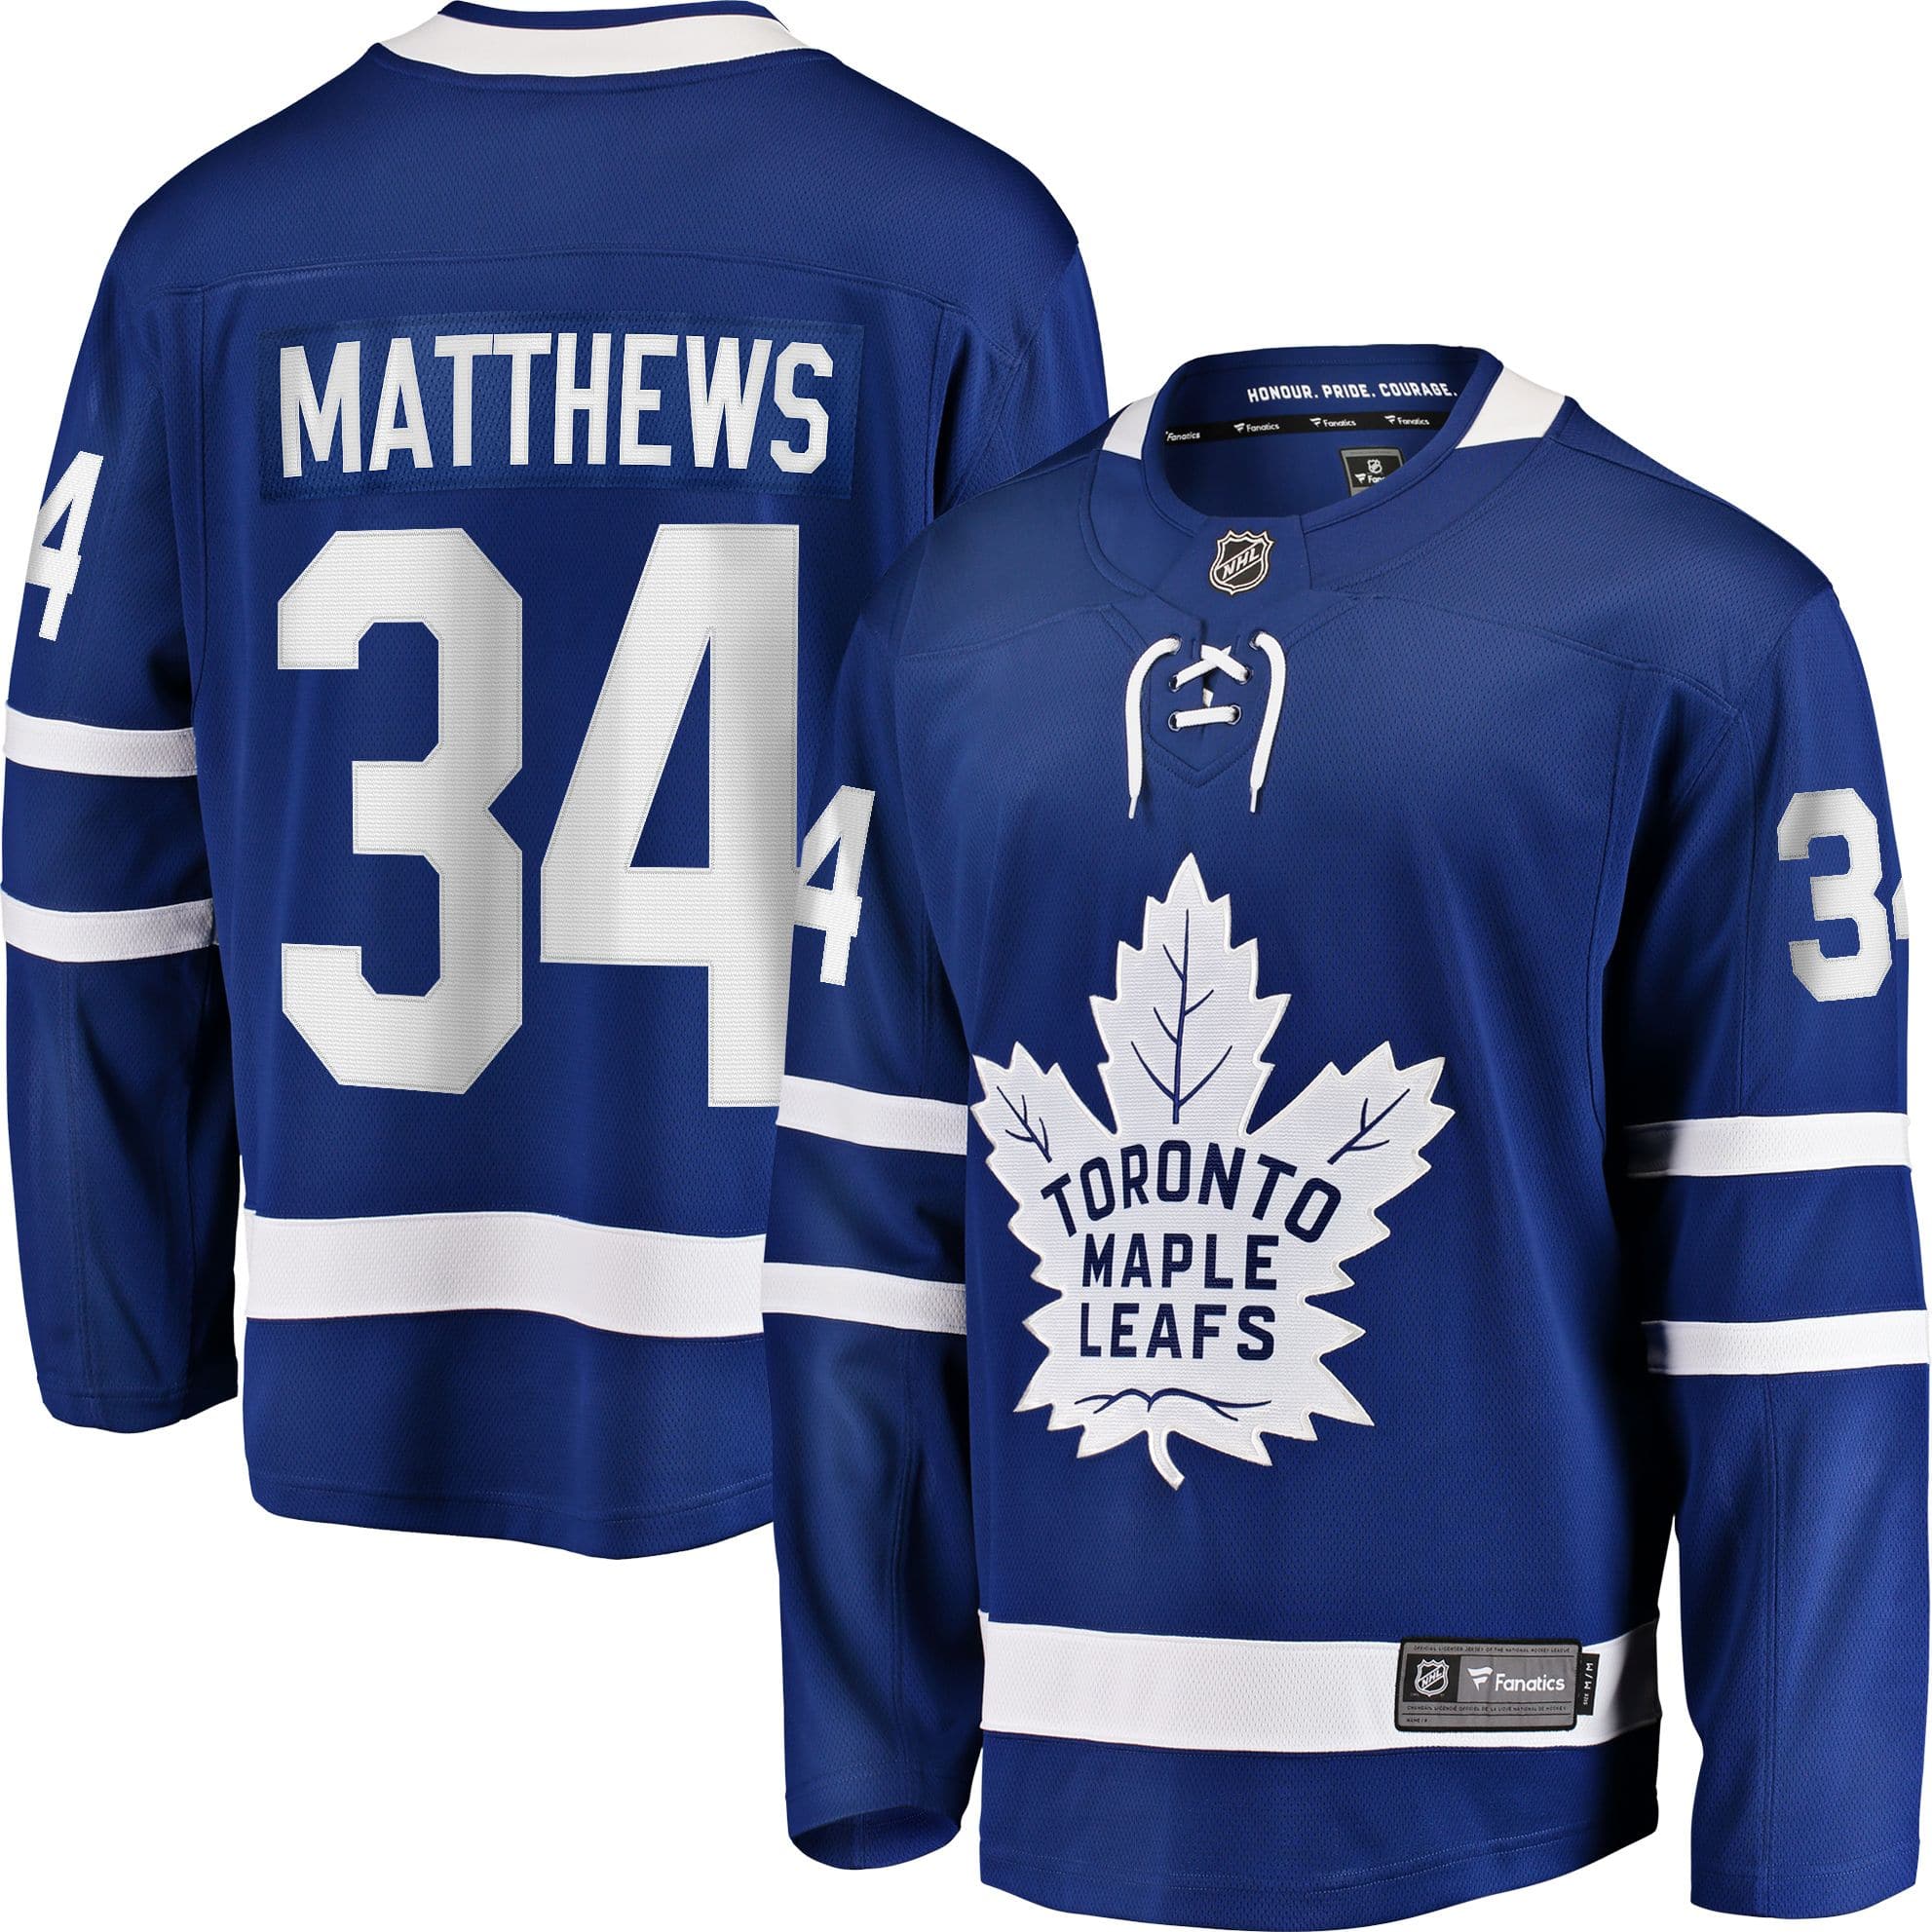 Toronto Maple Leafs: Ranking the top 5 jerseys of all time - Page 2